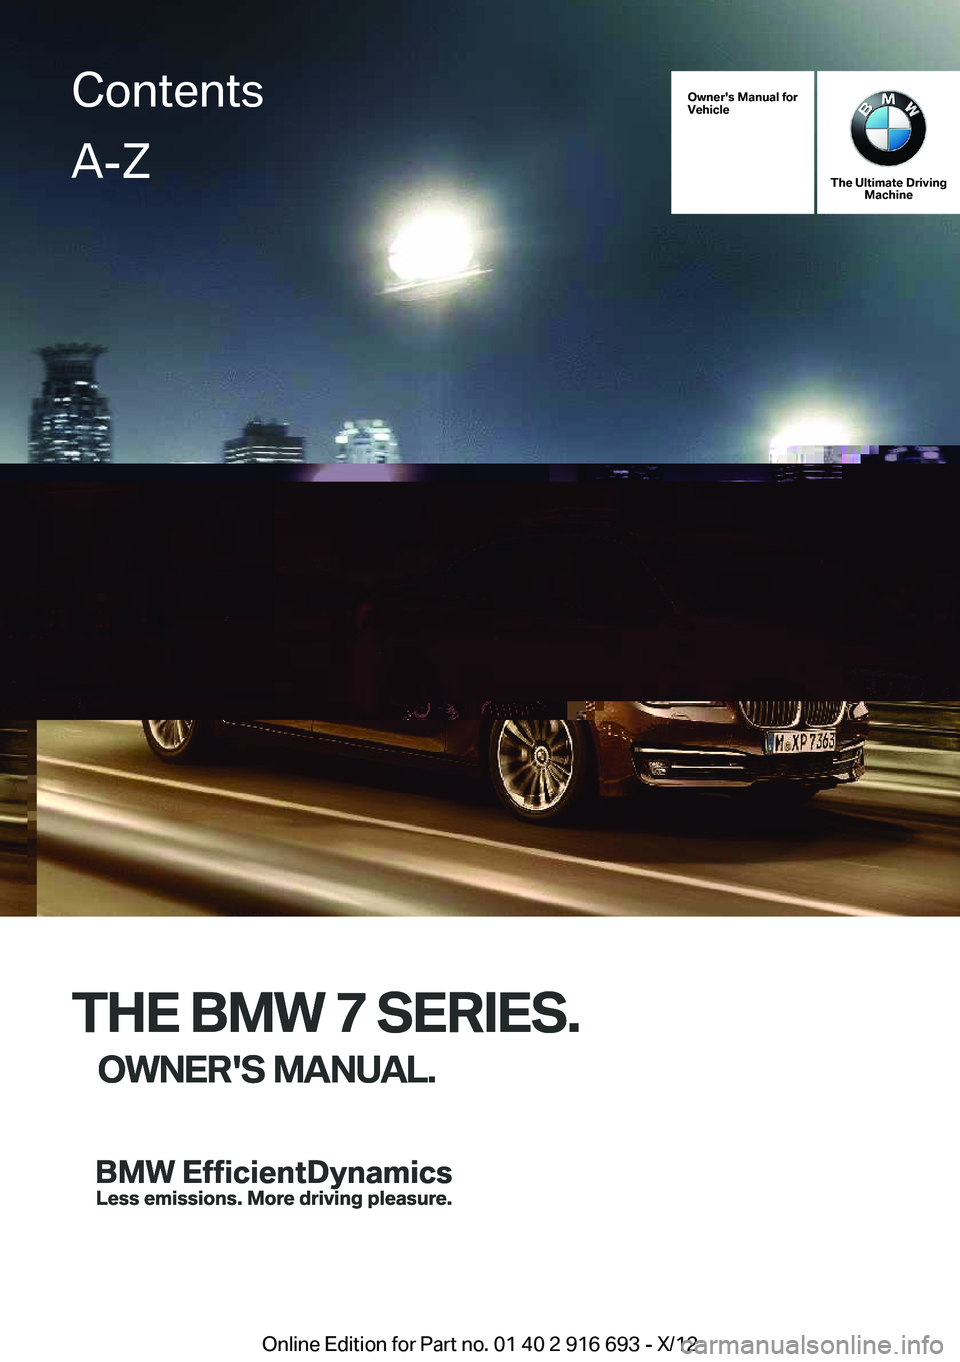 BMW 740LI 2013  Owners Manual Owner's Manual for
Vehicle
THE BMW 7 SERIES.
OWNER'S MANUAL.
The Ultimate Driving Machine
THE BMW 7 SERIES.
OWNER'S MANUAL.
ContentsA-Z
Online Edition for Part no. 01 40 2 916 693 - X/12  